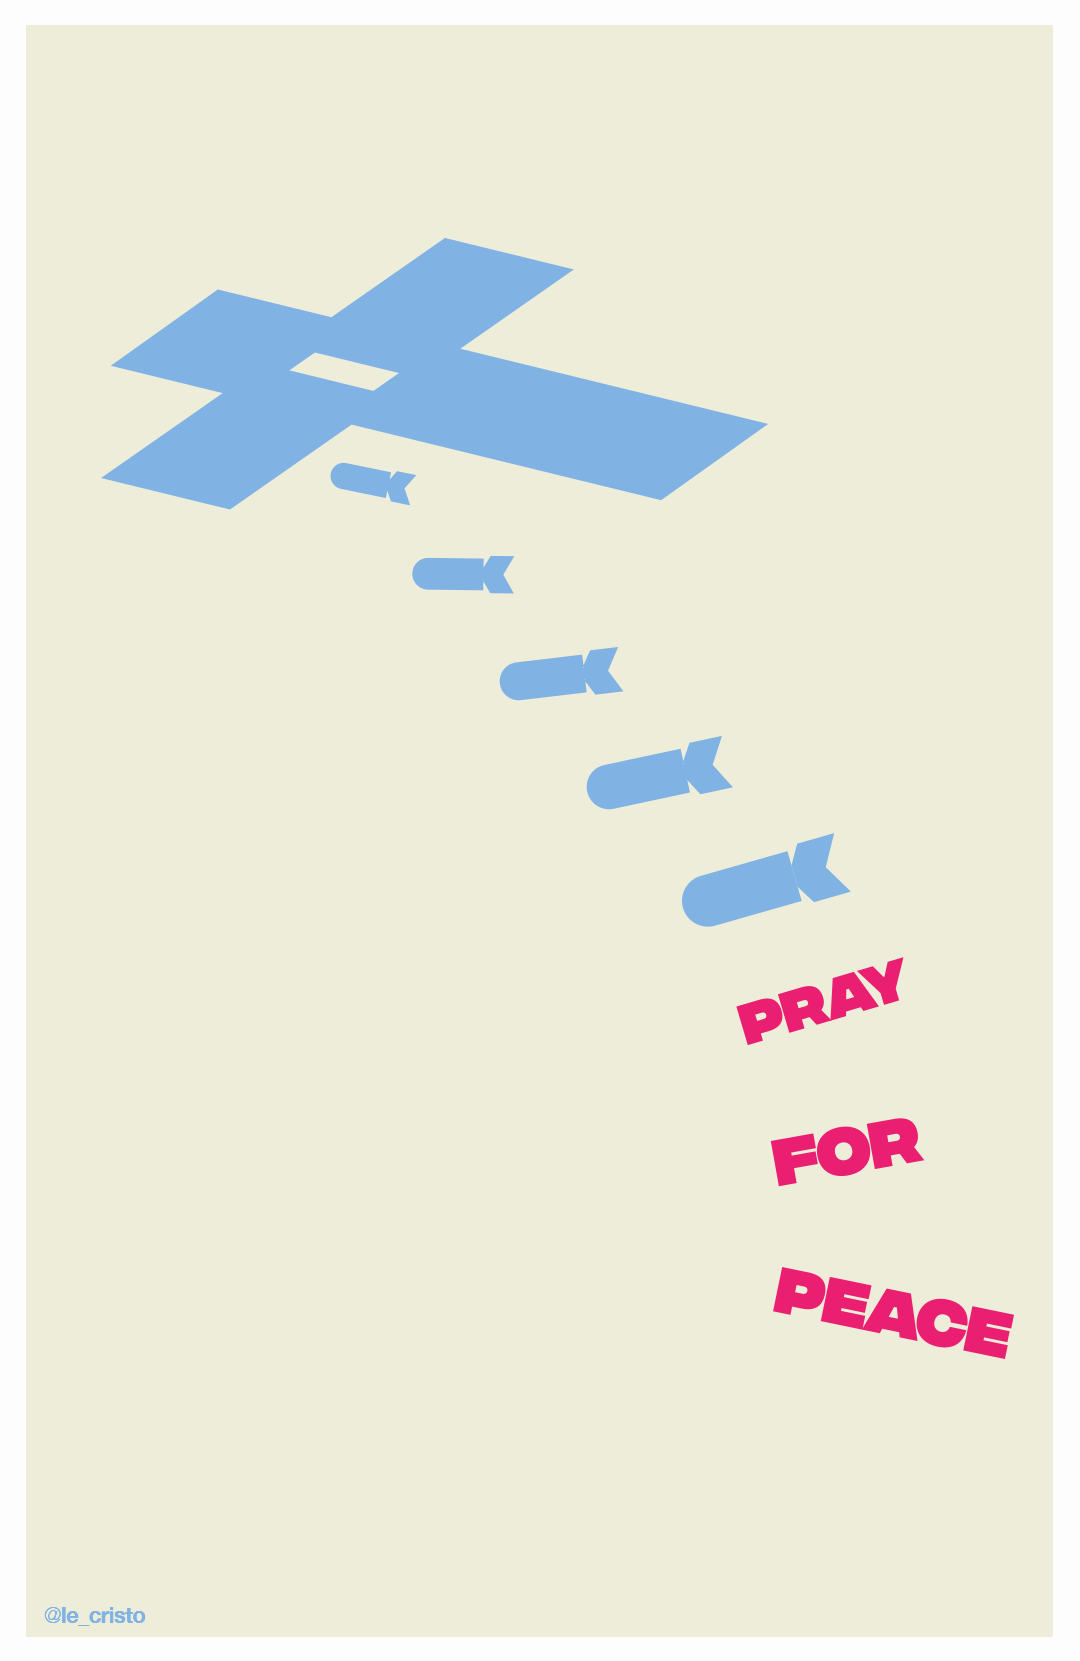 religious symbol attacking with bombs and prayers